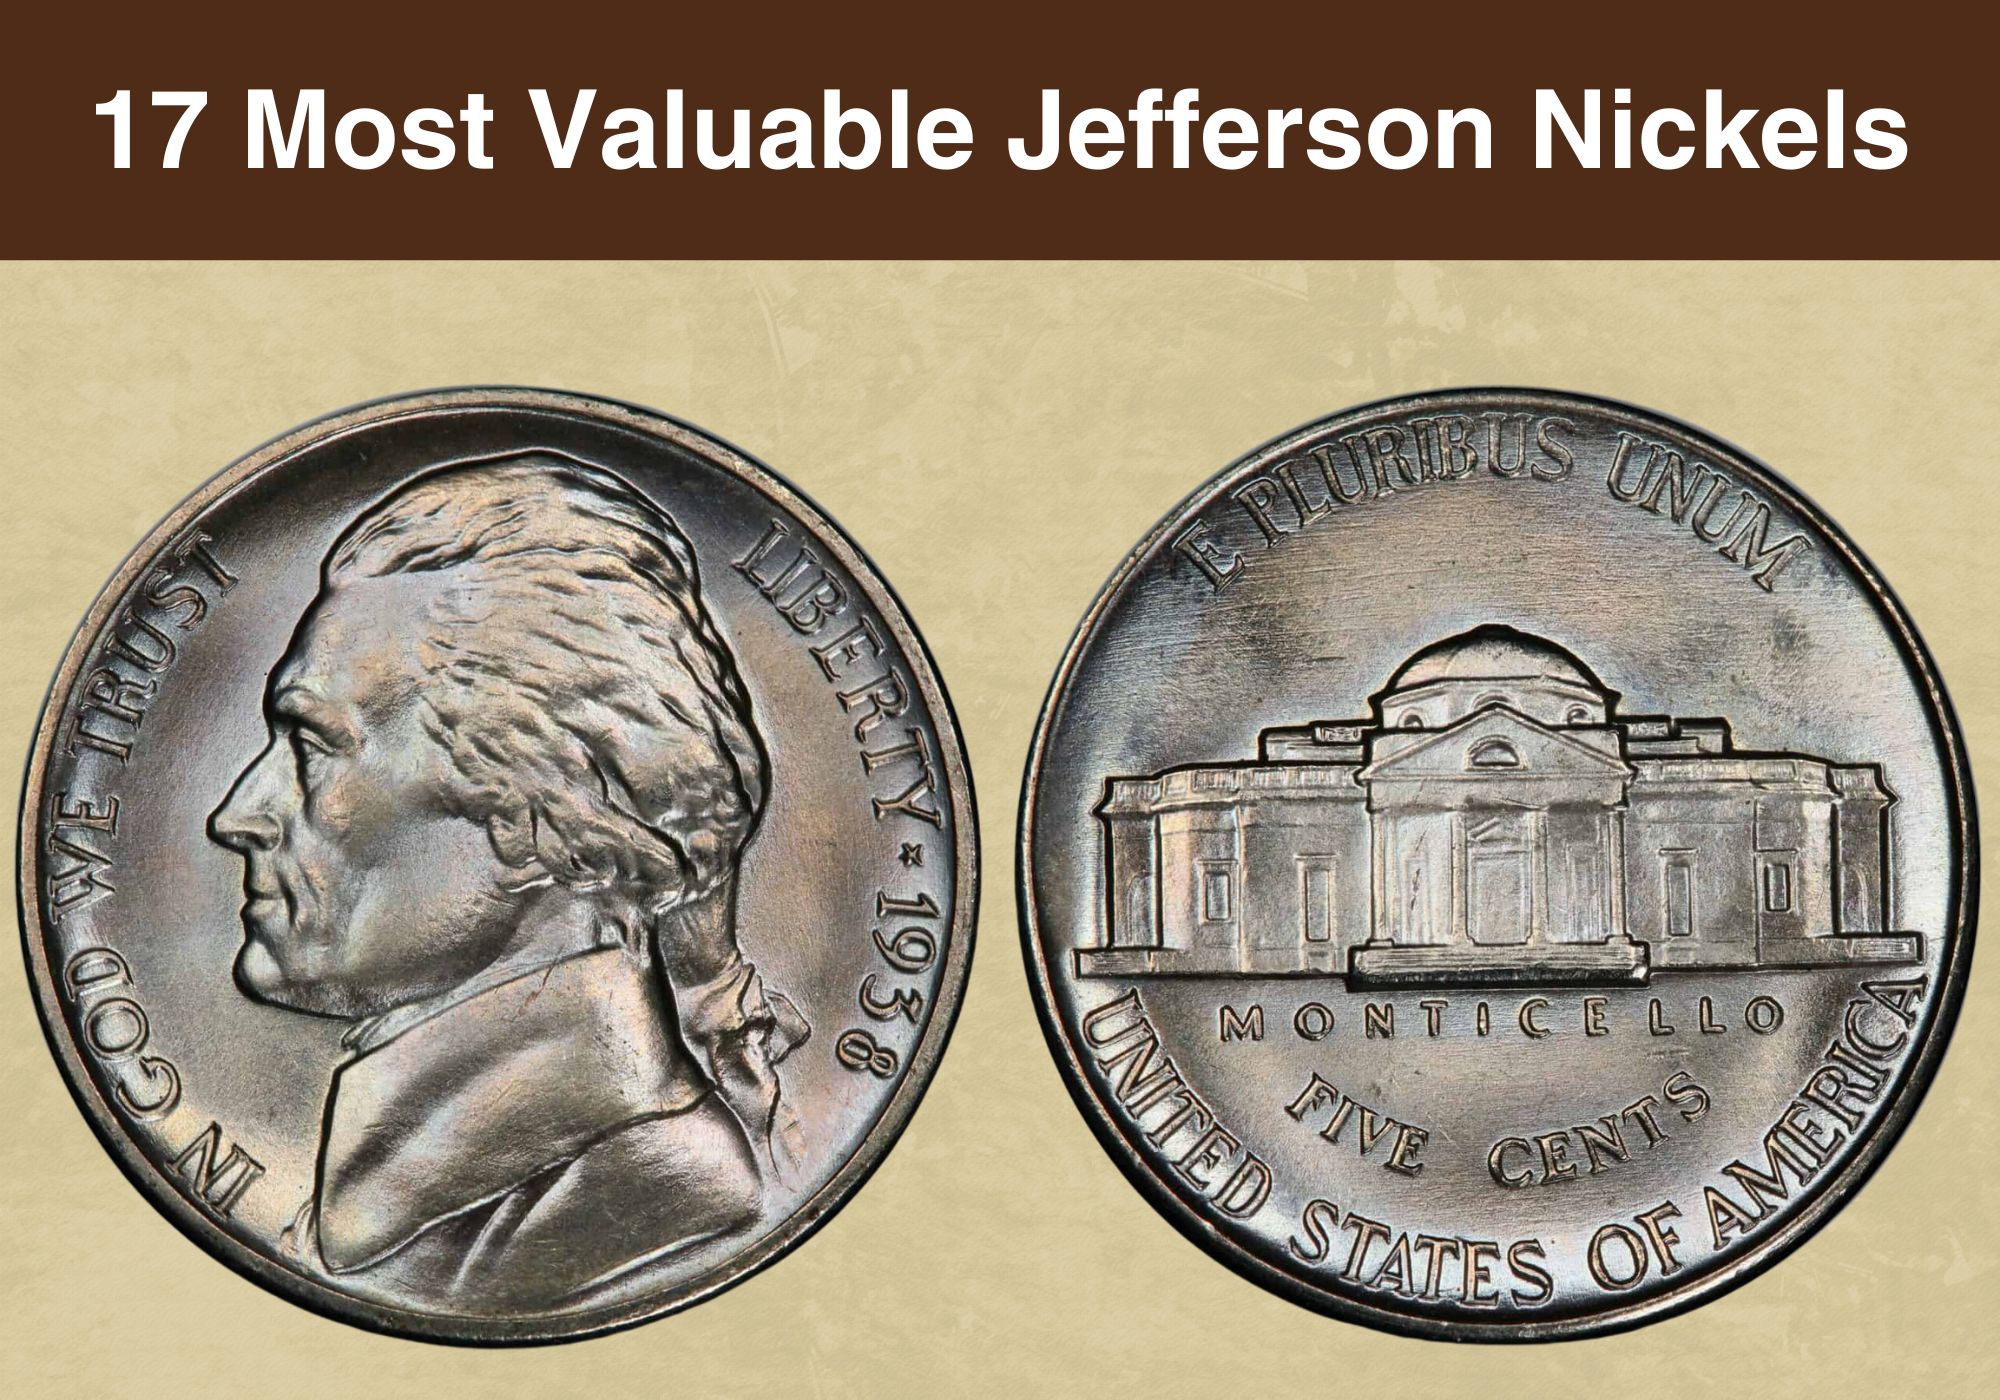 17 Most Valuable Jefferson Nickels